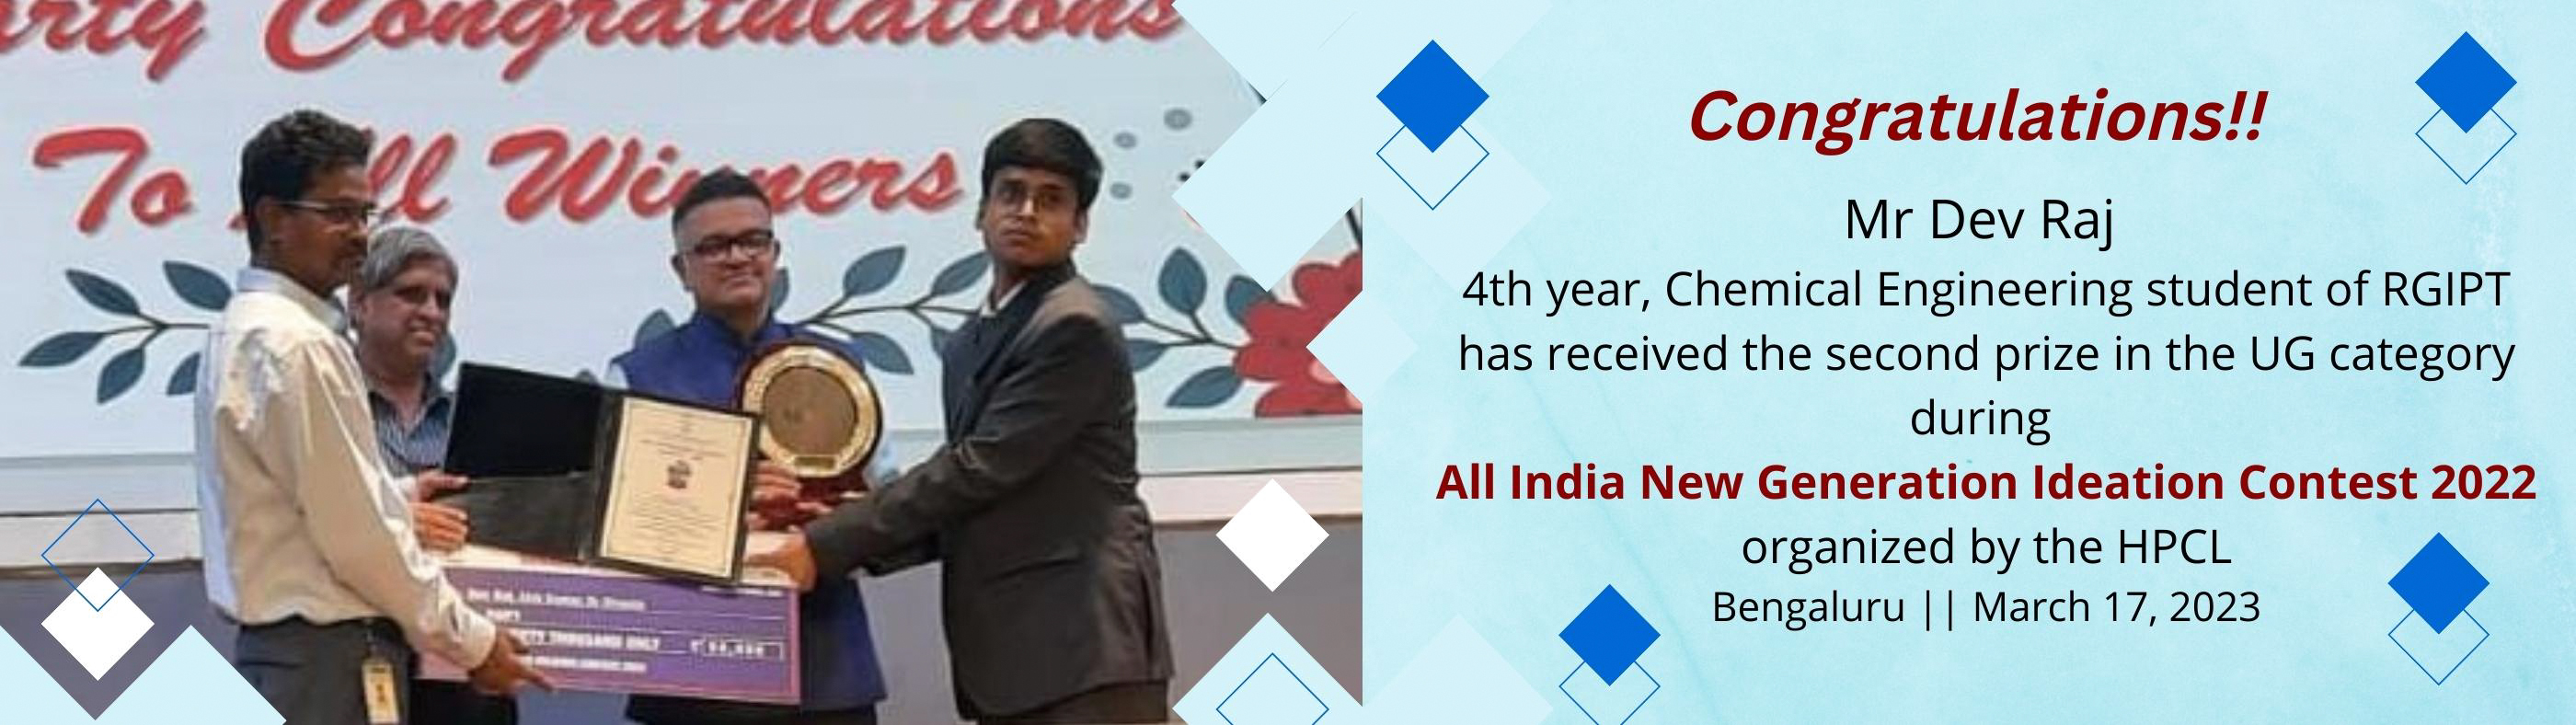 KUDOS to Dev Raj || Department wishes you even more success in future !